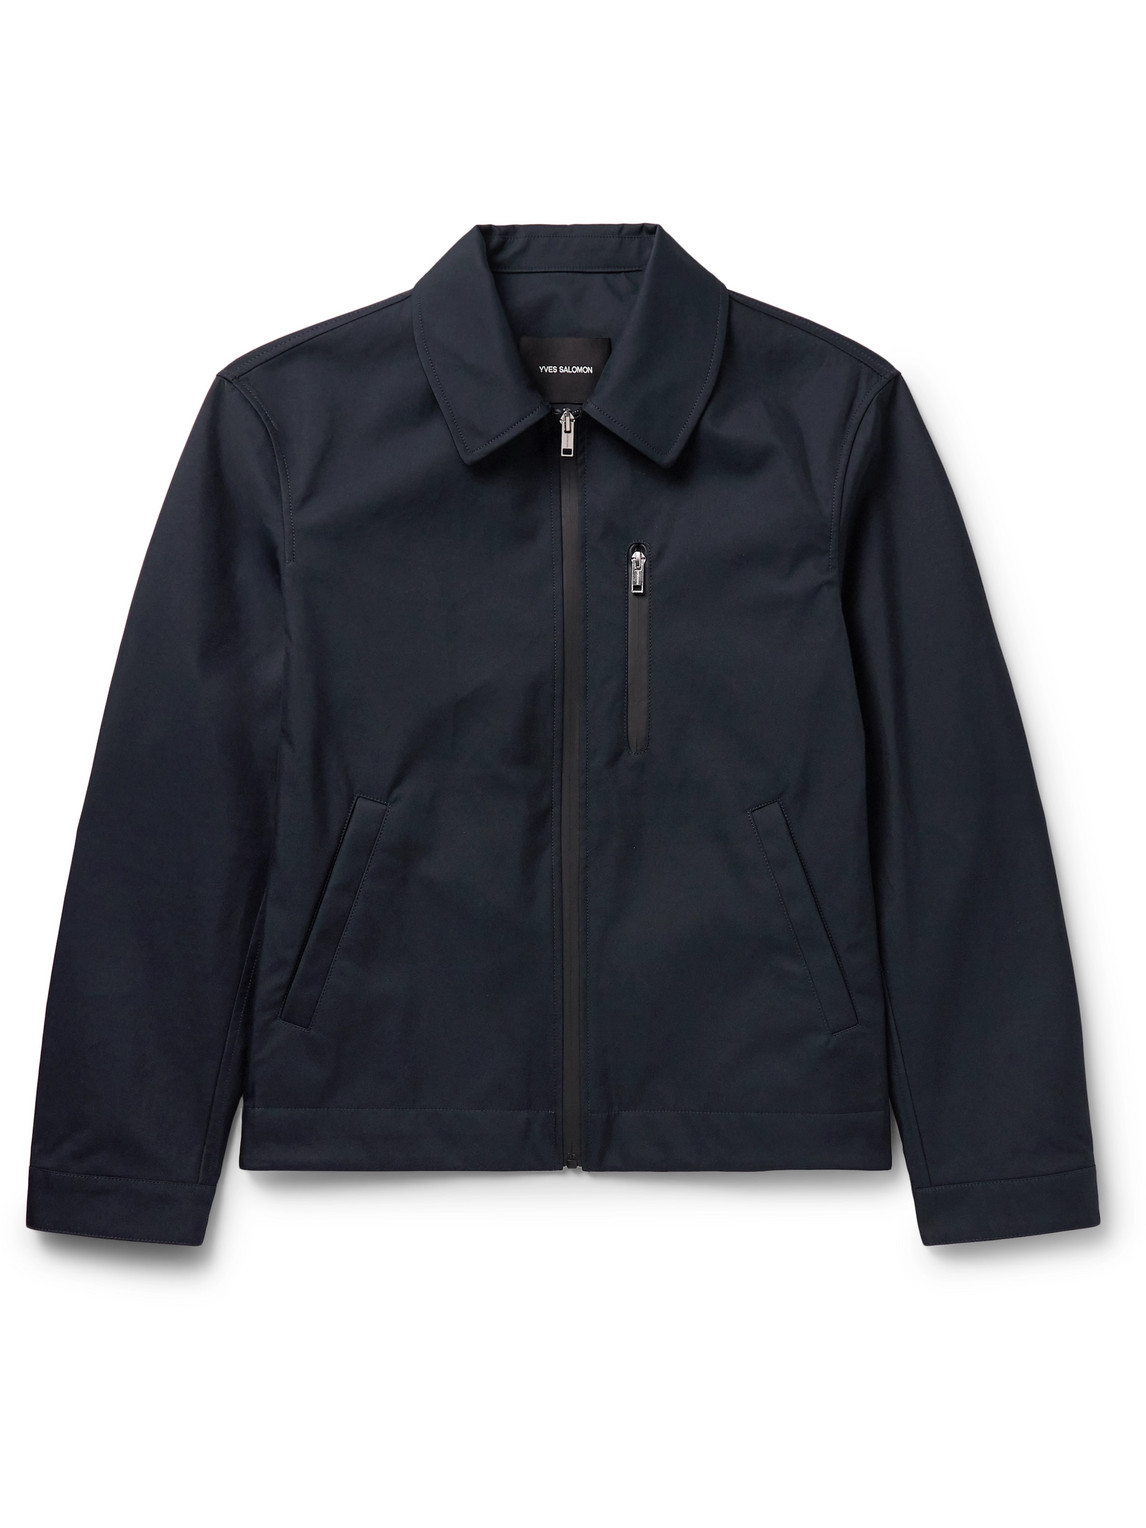 Double-Faced Cotton-Twill Jacket